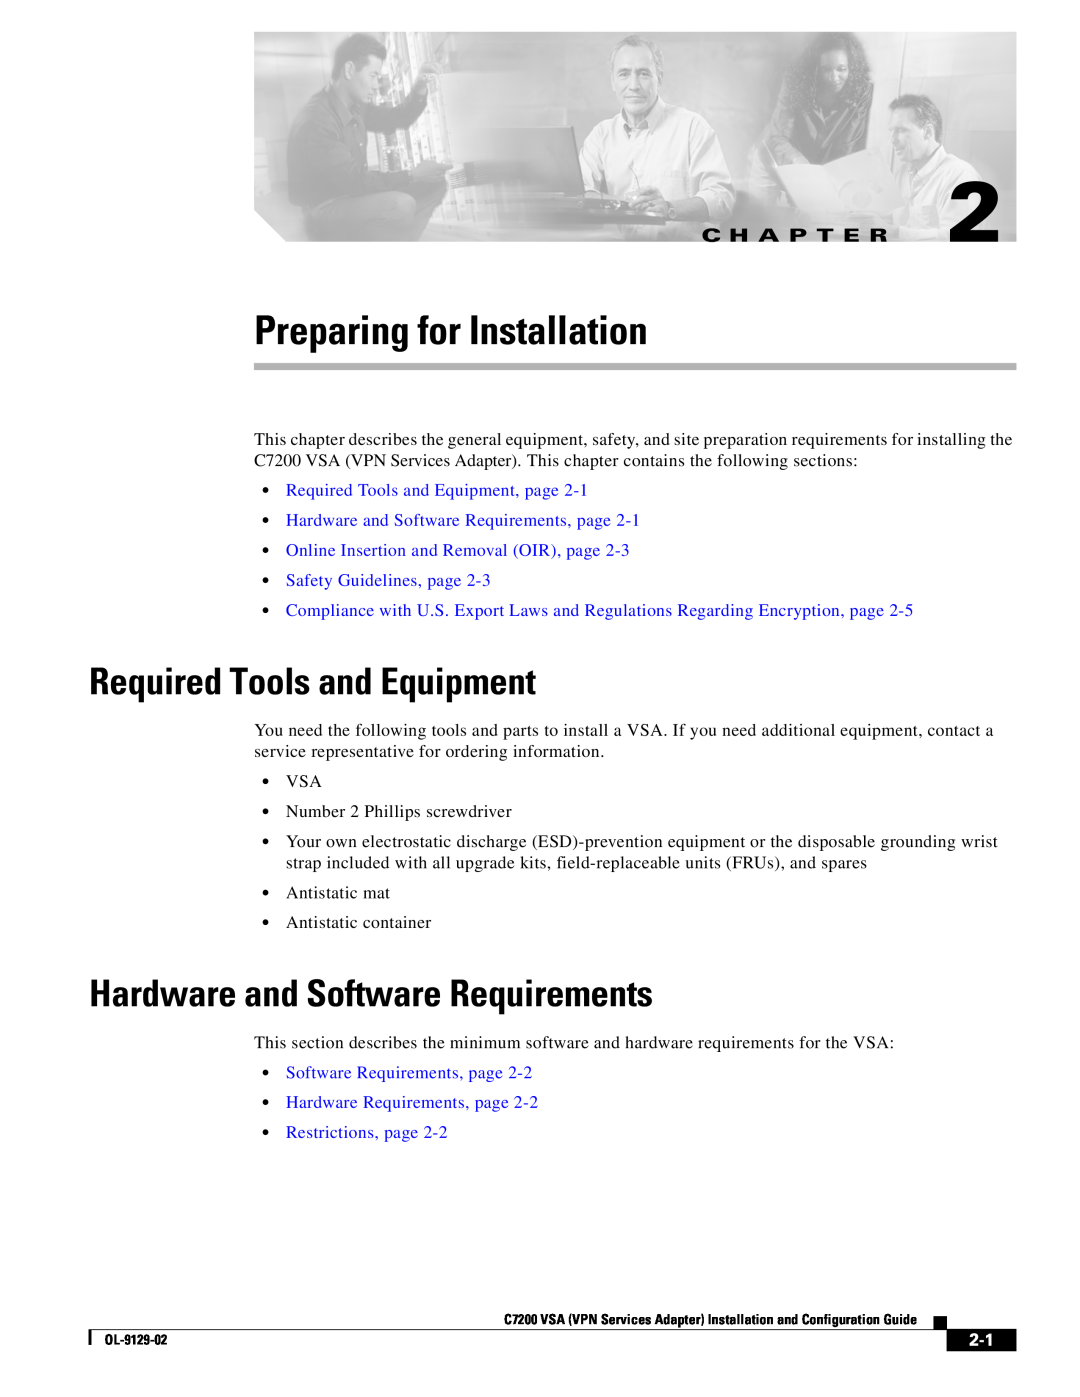 Cisco Systems C7200 manual Preparing for Installation, Required Tools and Equipment, Hardware and Software Requirements 